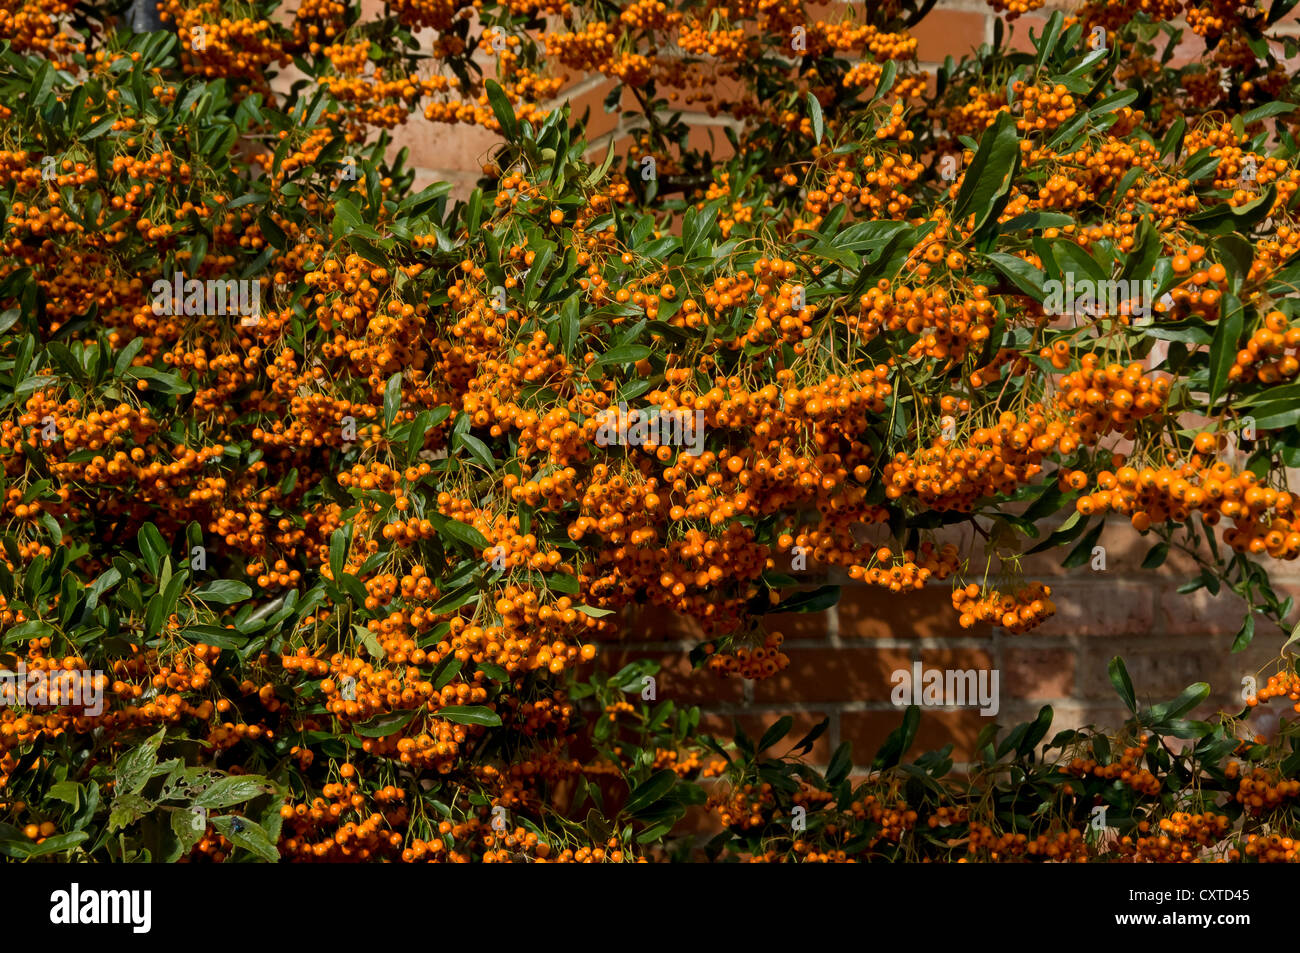 Close up of orange pyracantha berries climbing plant in autumn England UK United Kingdom GB Great Britain Stock Photo